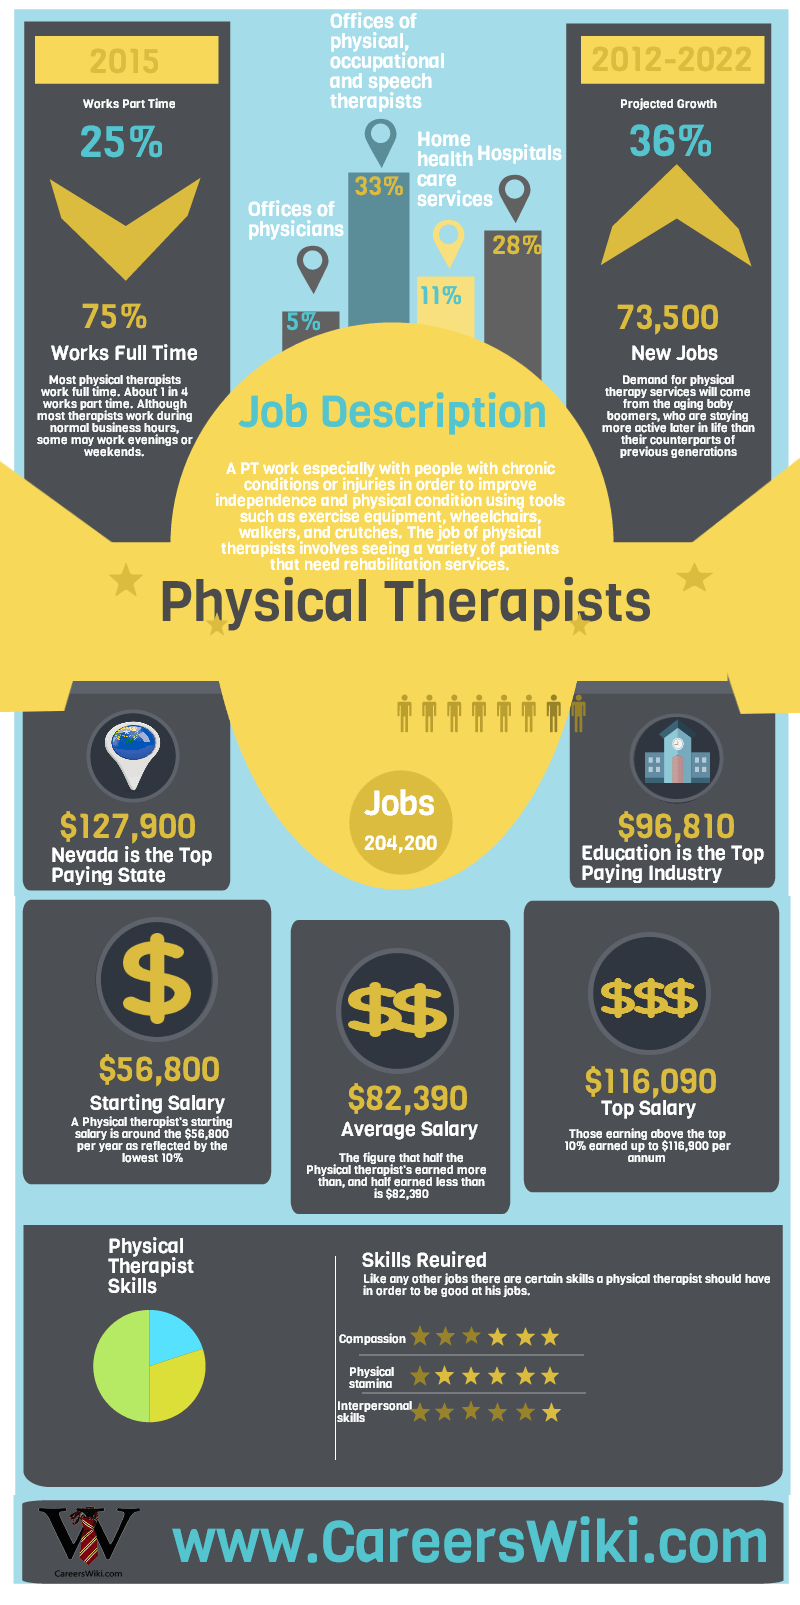 How Much Does a Physical Therapist Make? « CareersWiki.com